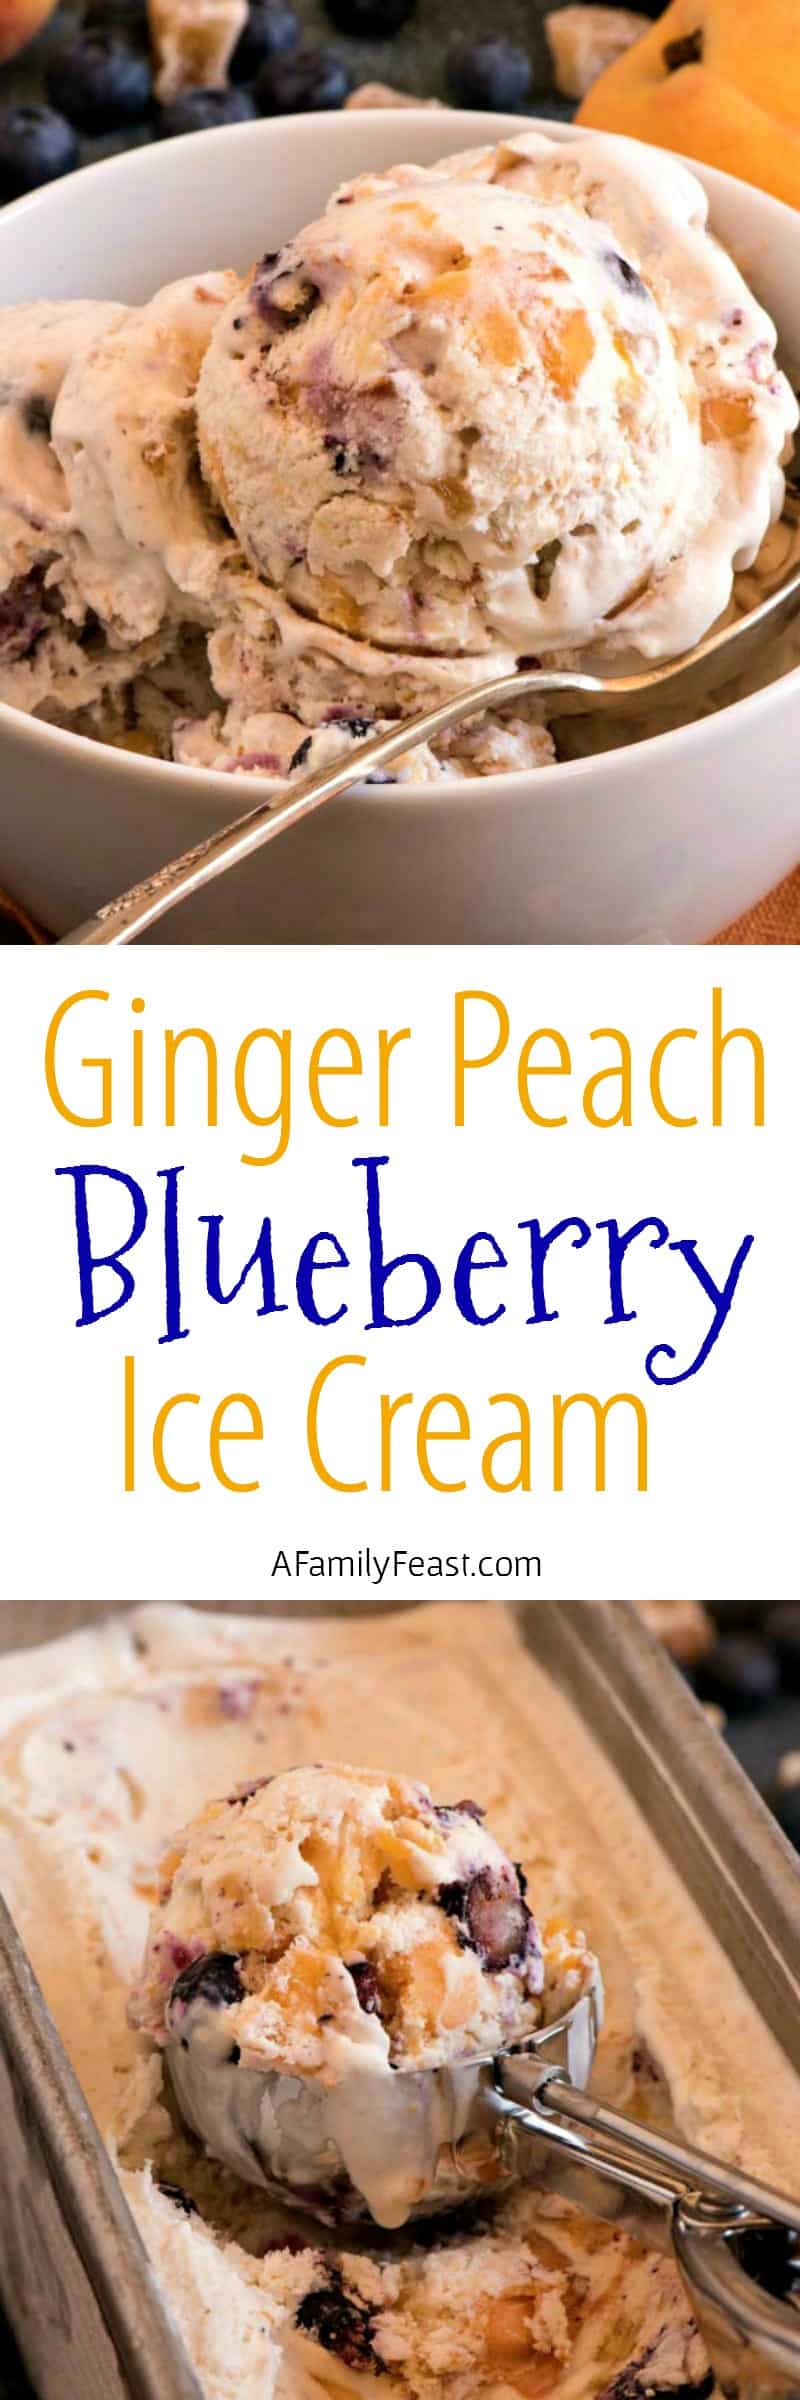 This Ginger Peach Blueberry Ice Cream is summertime in a bowl! Can be made no-churn or as a traditional churned ice cream.